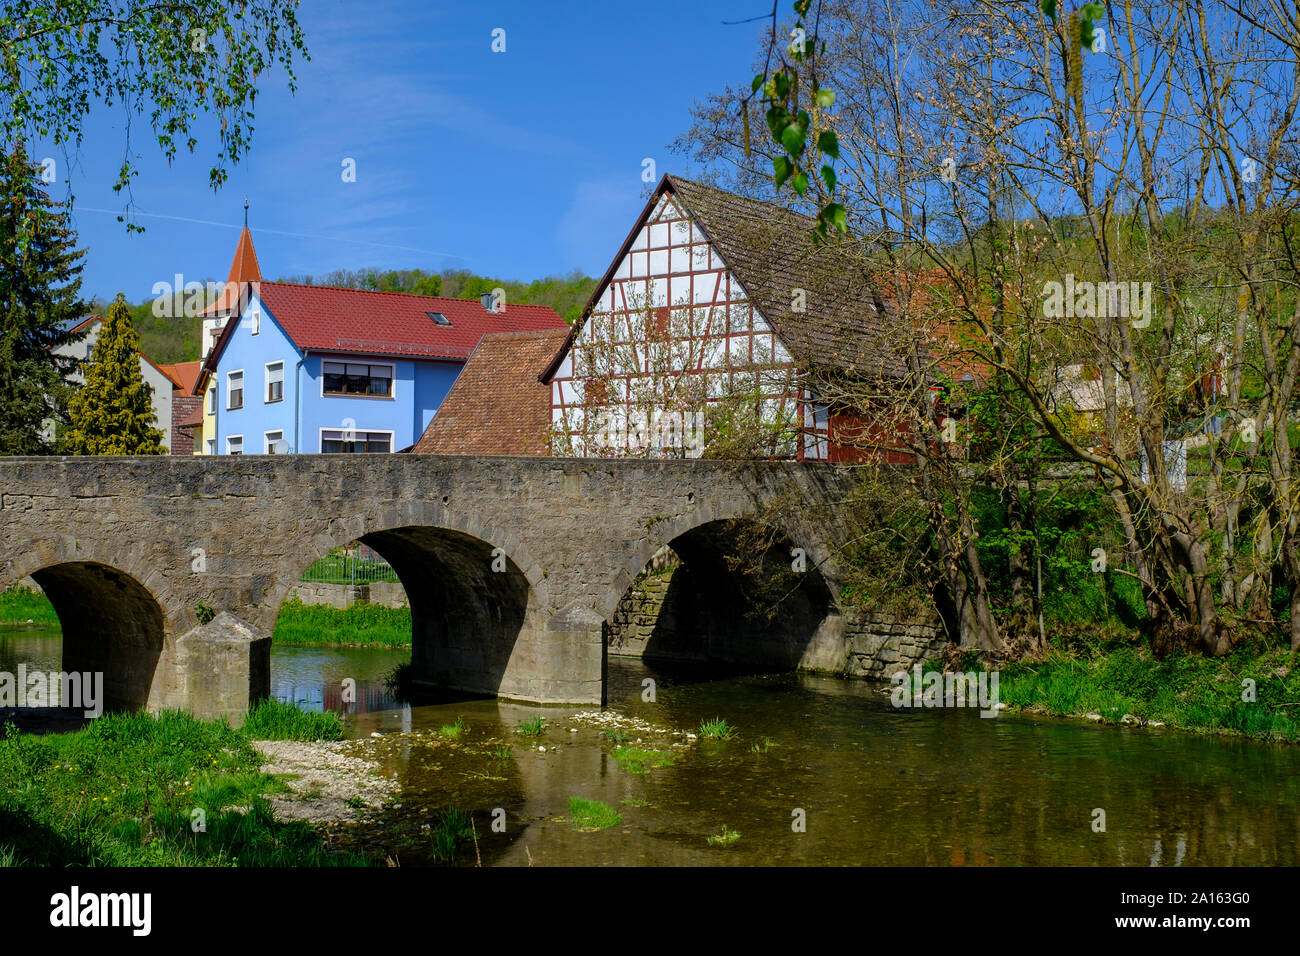 Old arch bridge over Tauber river with town houses in background, Adelshofen, Bavaria, Germany Stock Photo